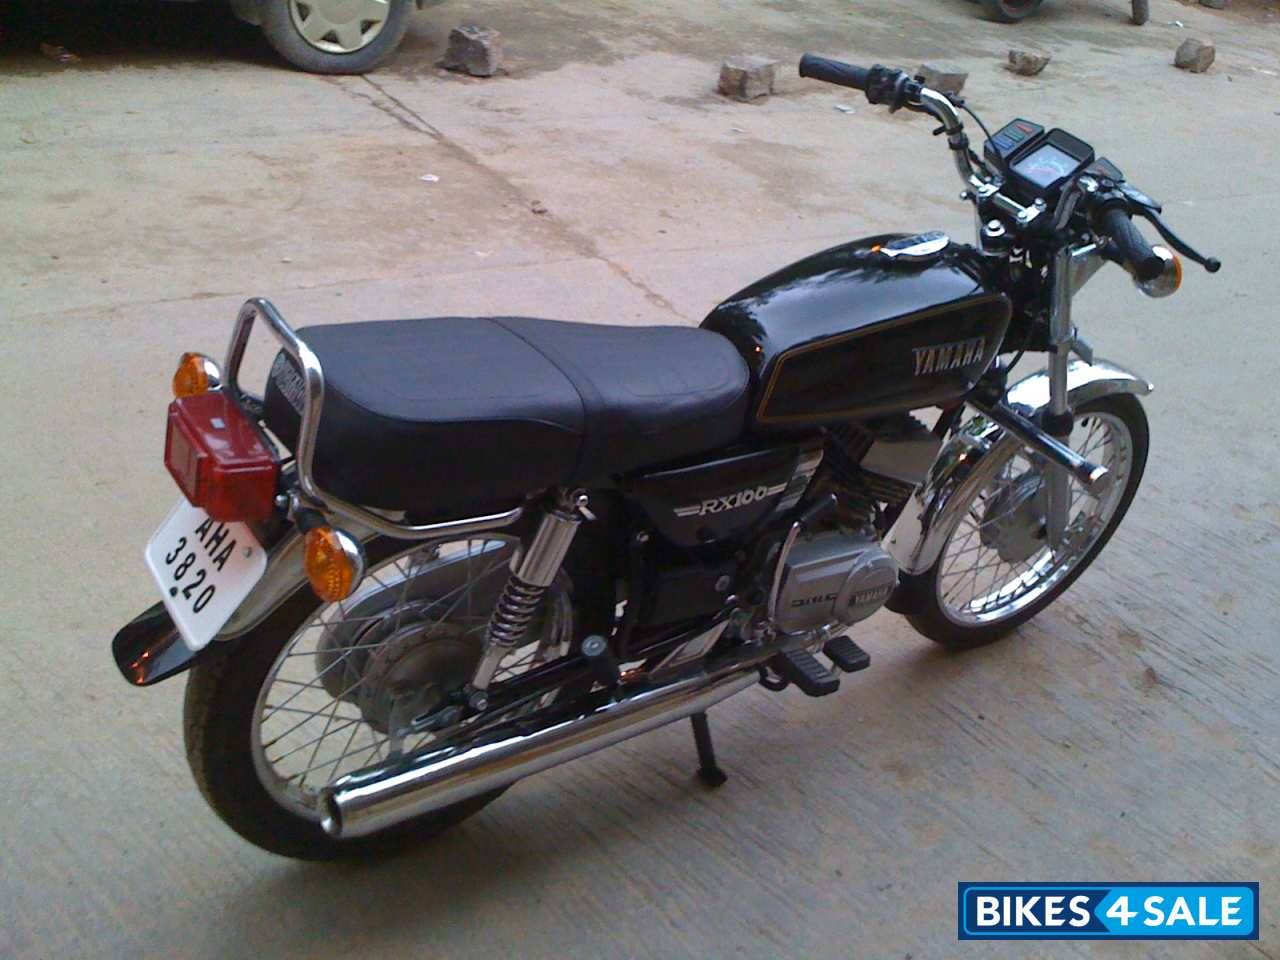 Used 1987 Model Yamaha Rx 100 For Sale In Hyderabad Id Black Colour Bikes4sale